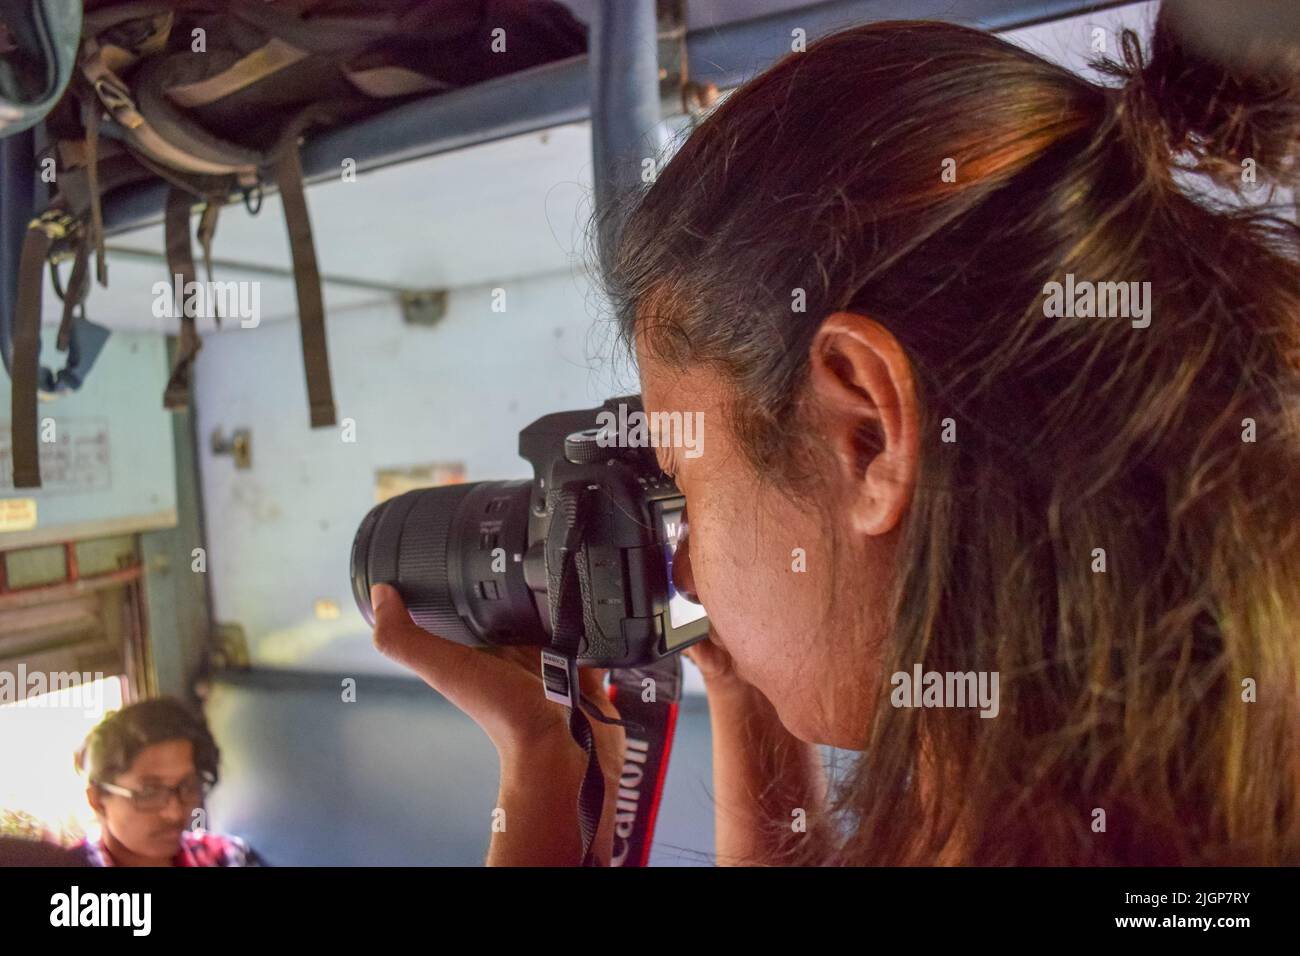 An Indian women taking photos during traveling in a train. women tourist and traveling photography concept Stock Photo